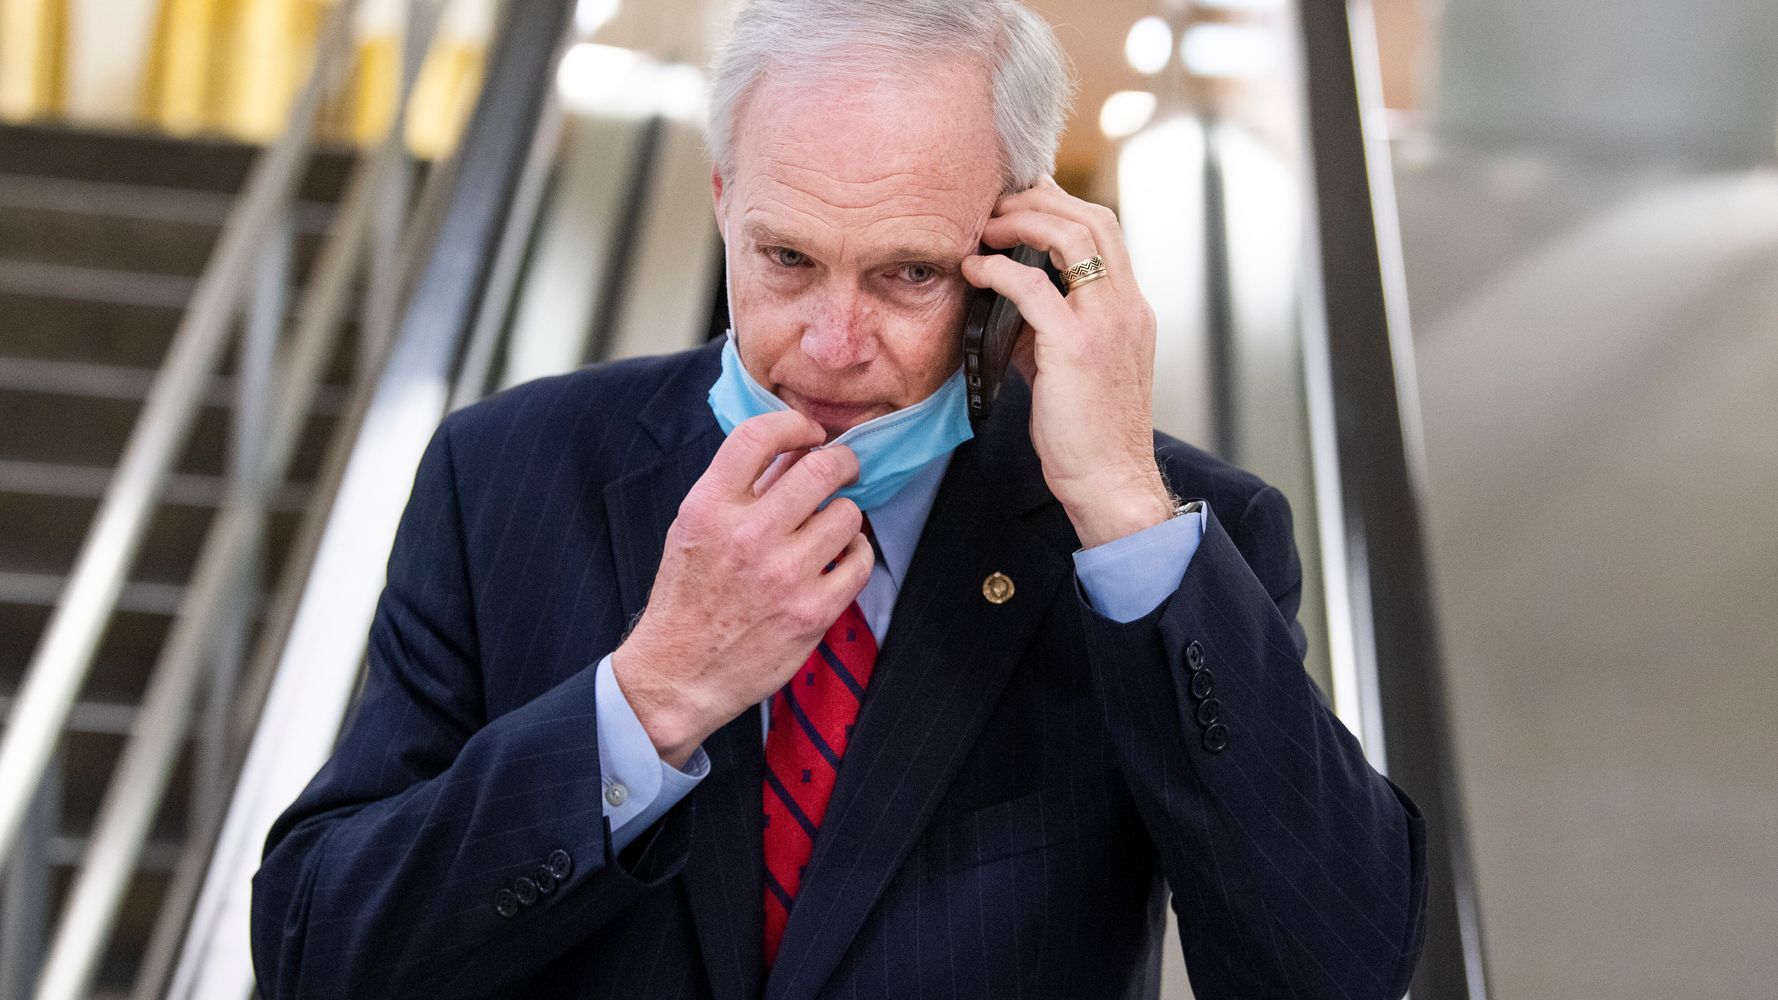 Sen. Ron Johnson Says He Sees 'No Reason' For COVID-19 Mass Vaccination